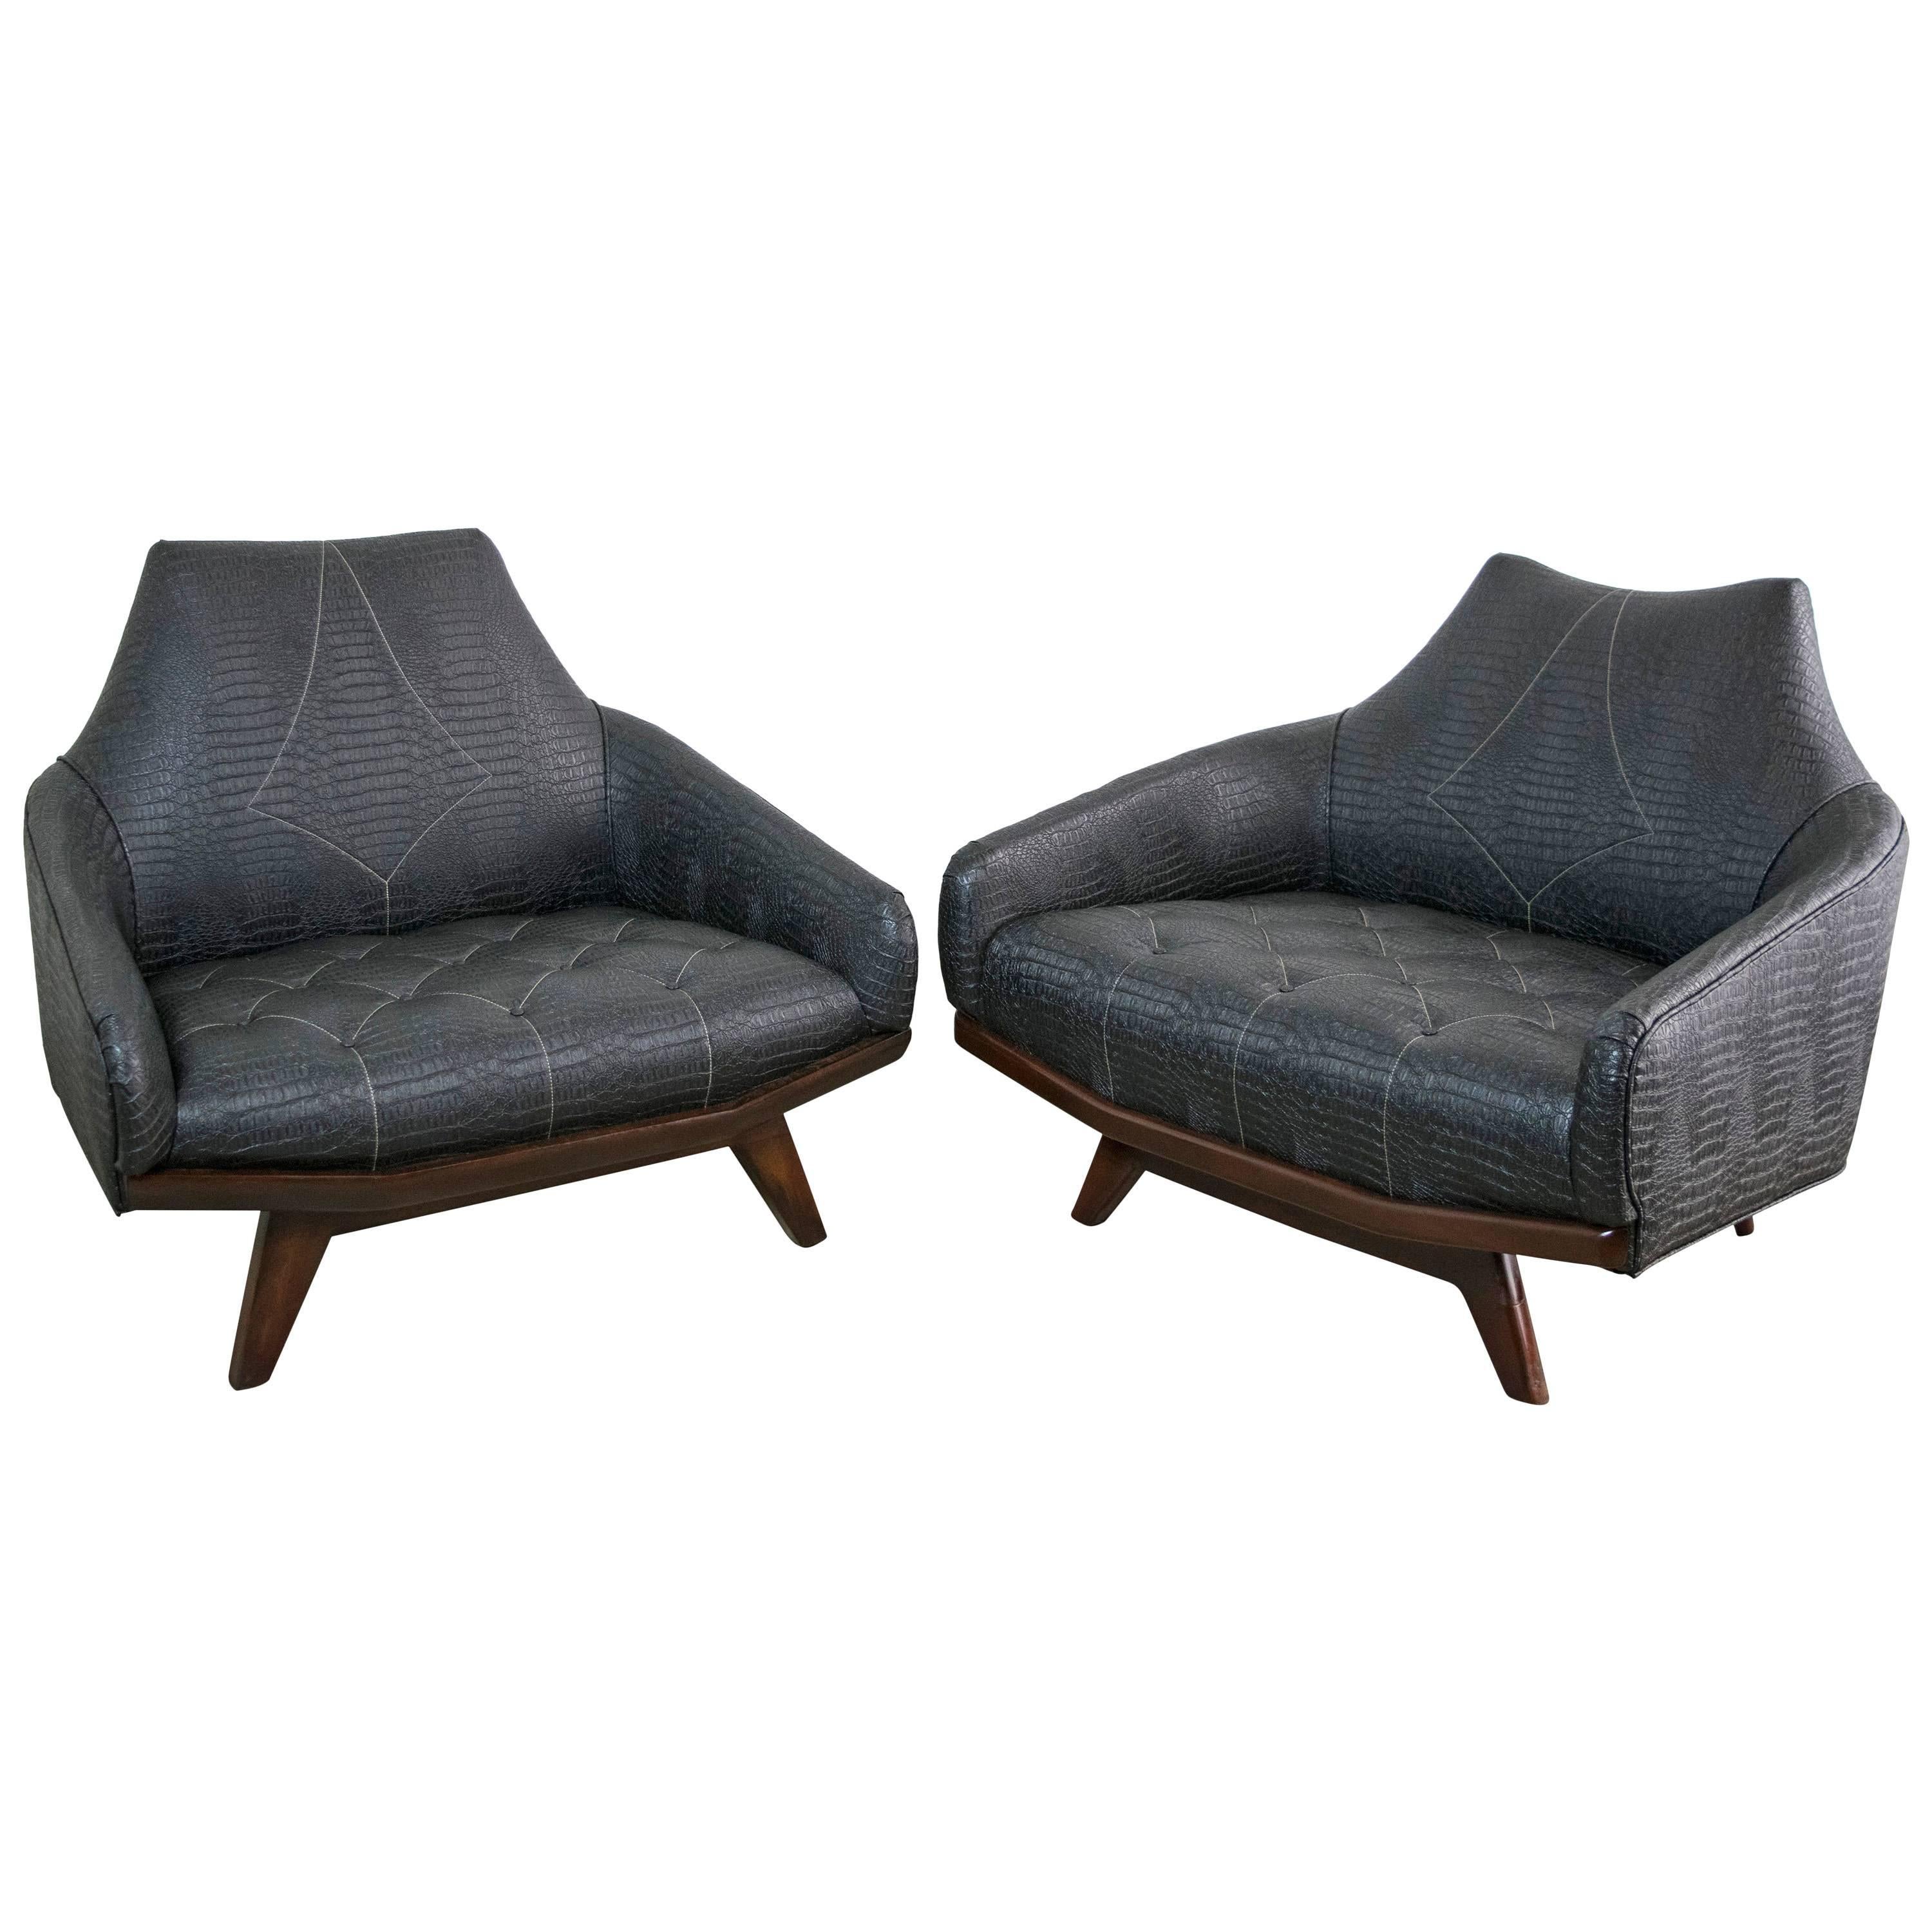 Wildly Sculptural Adrian Pearsall "Batman" Chairs in Black Faux Alligator